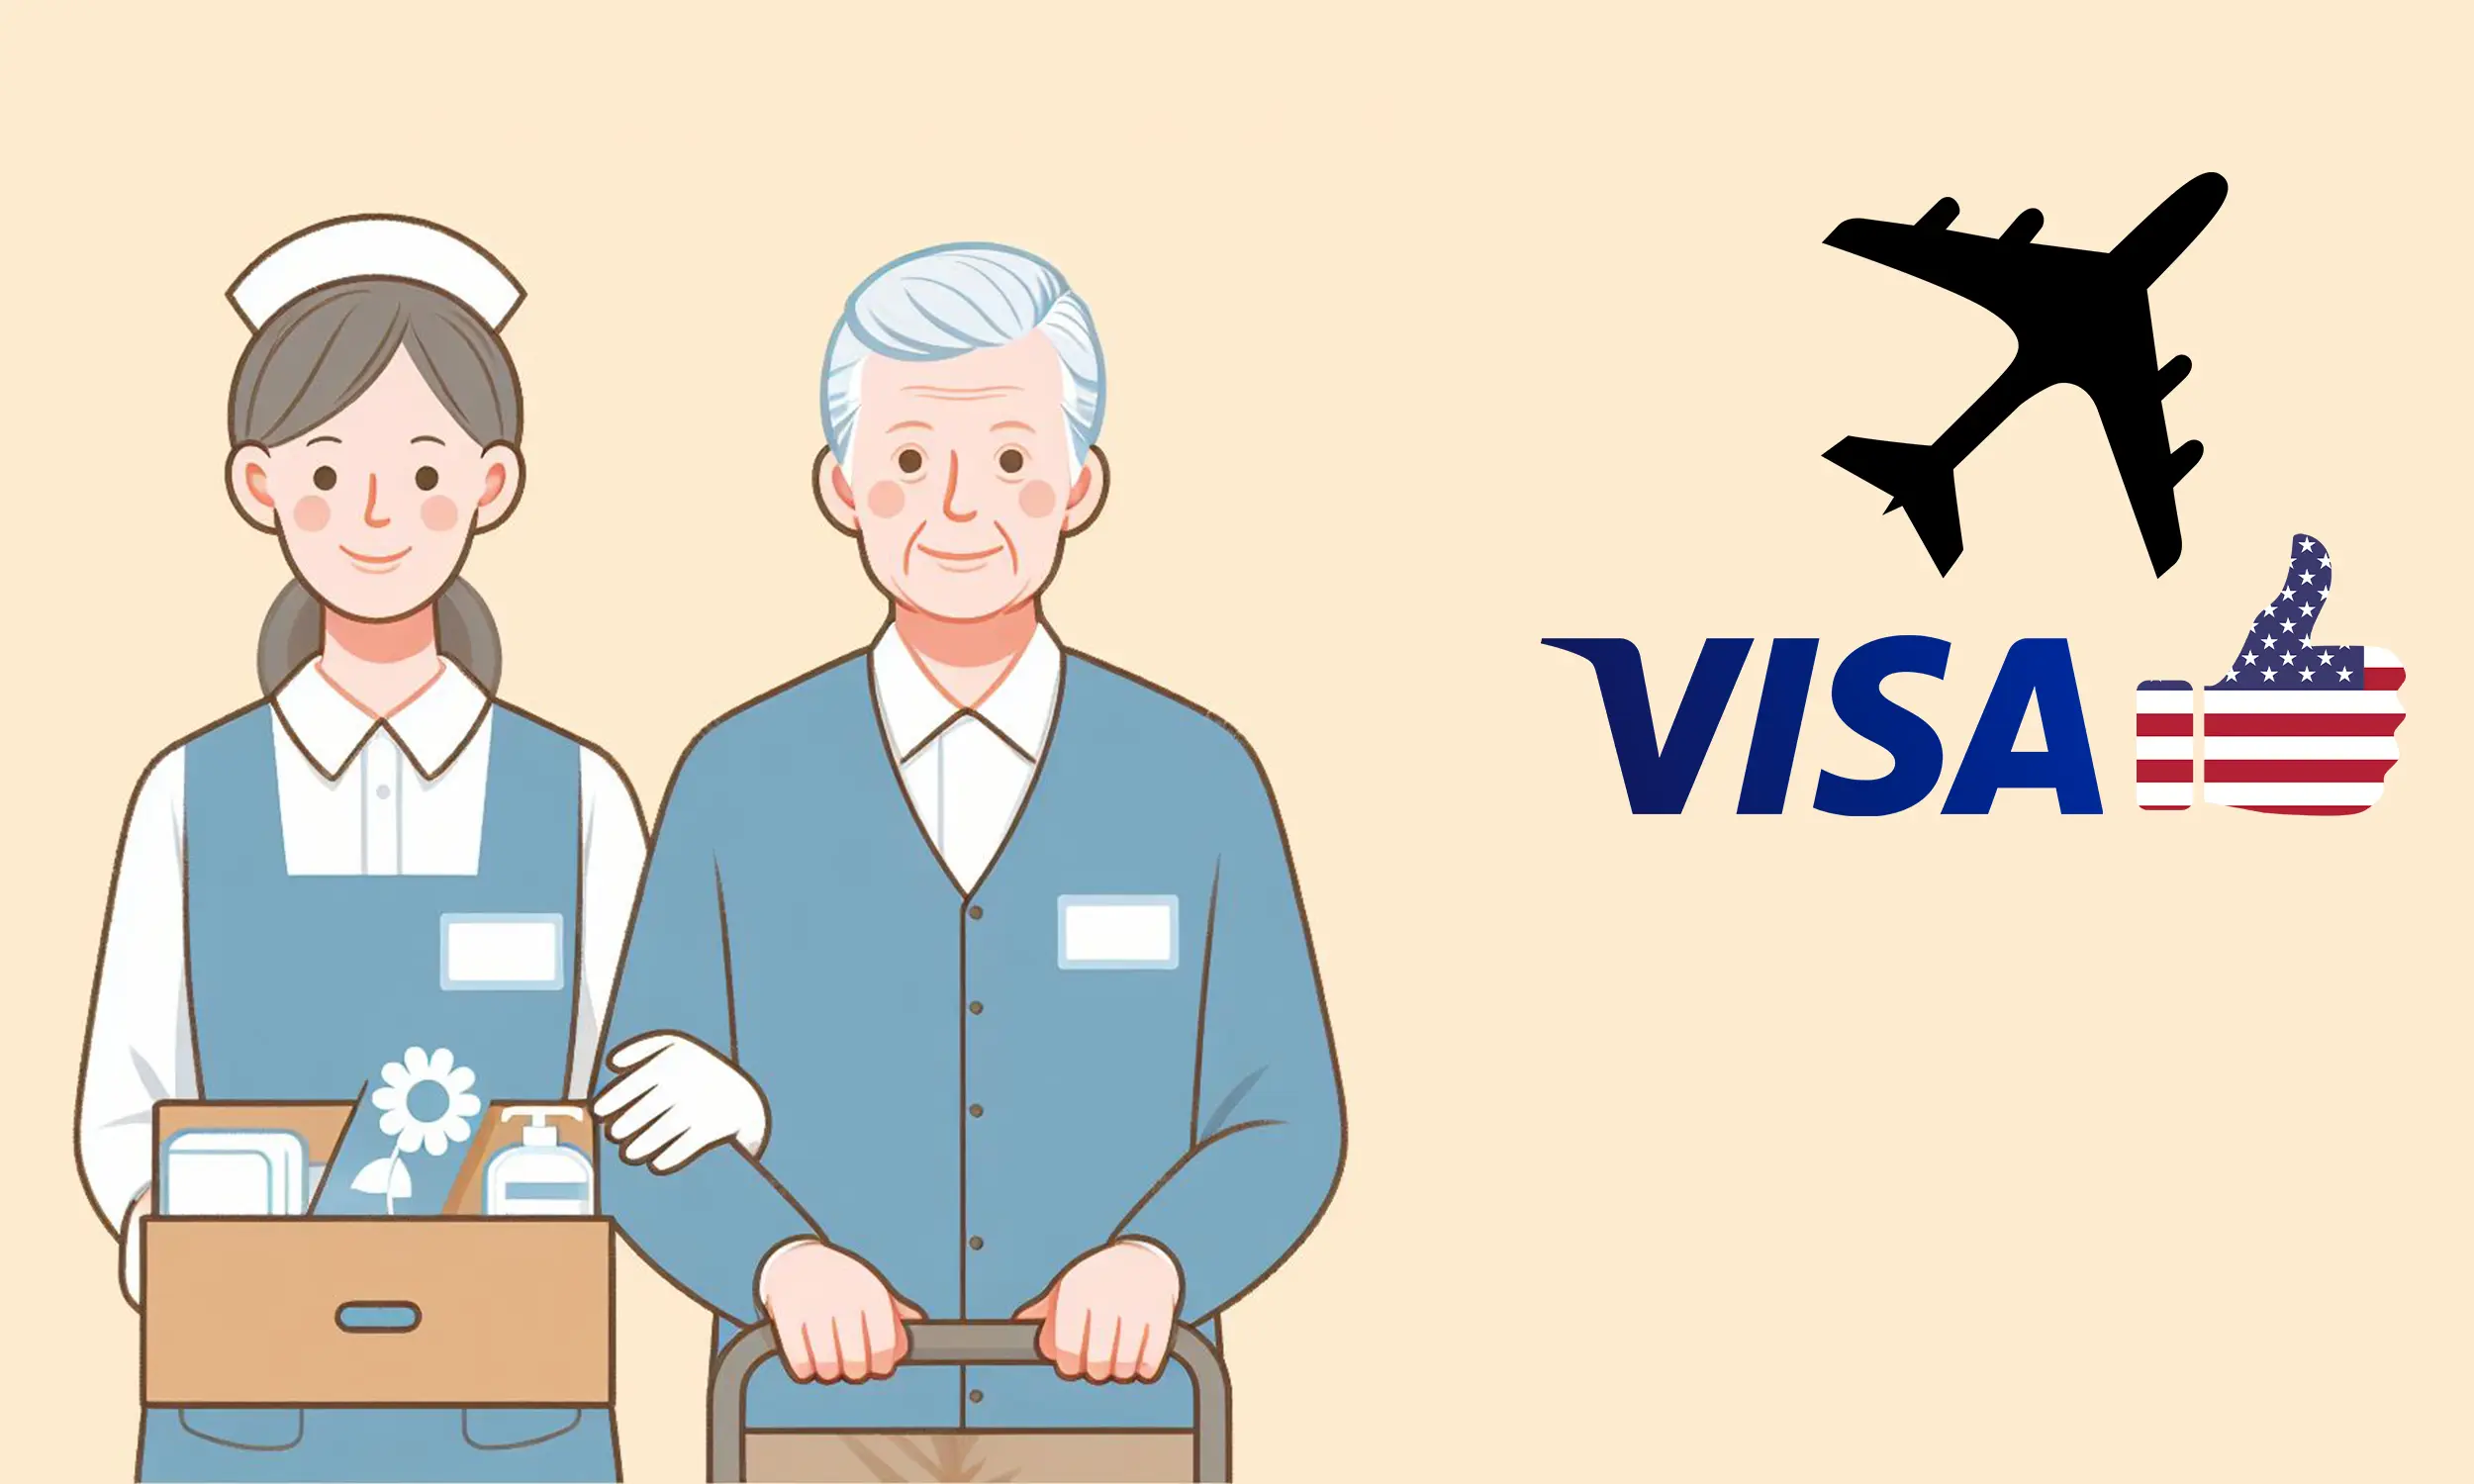 Elderly Care Jobs In the USA with Visa Sponsorship